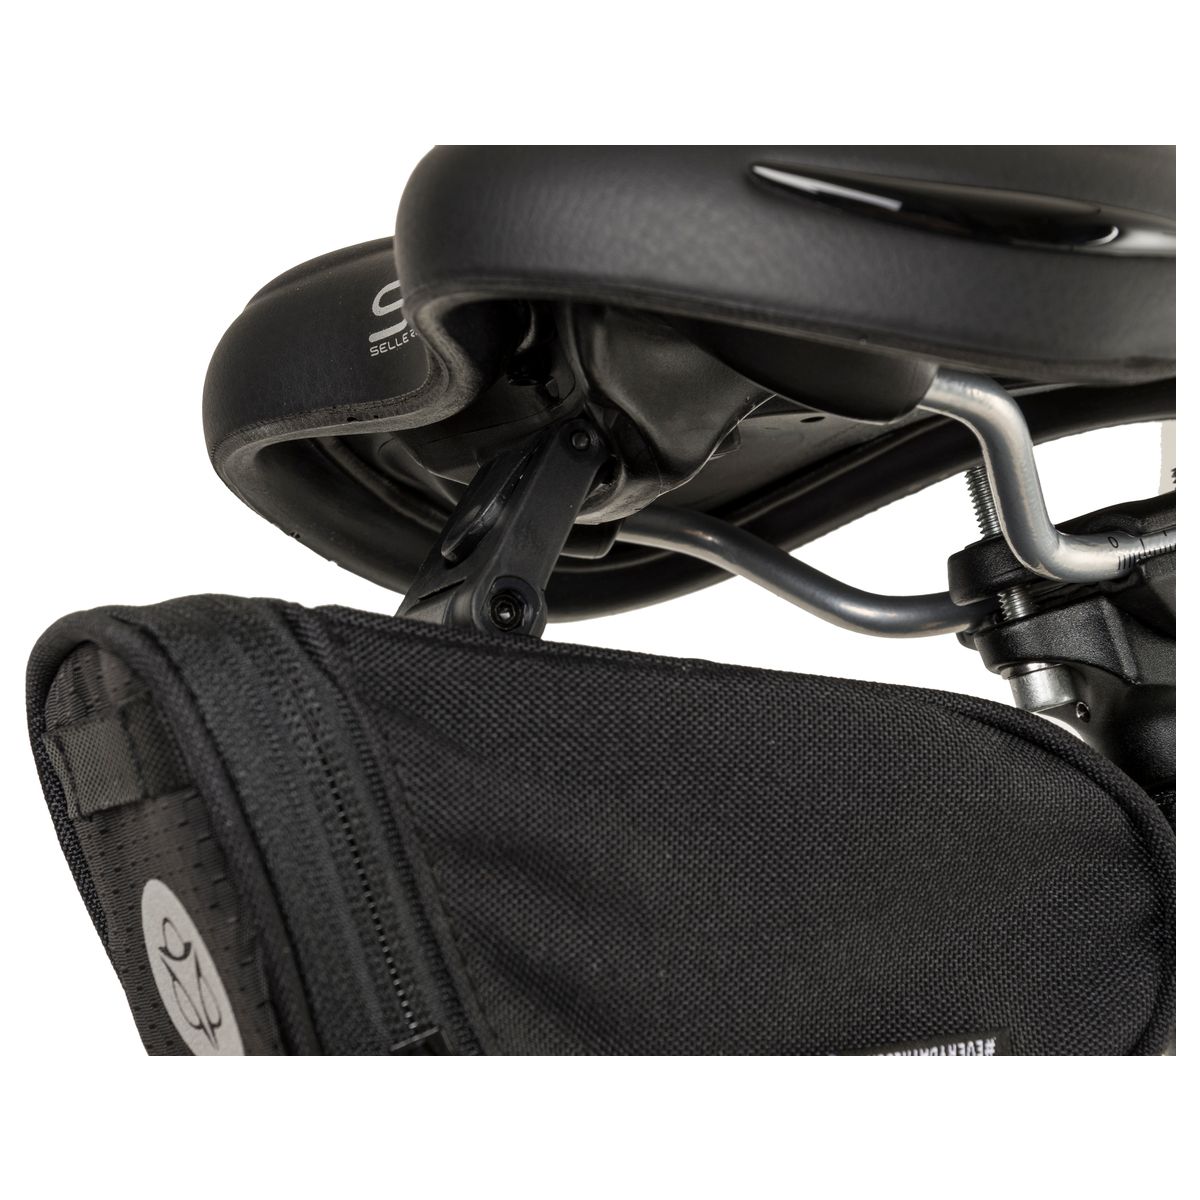 Saddle Bag Performance fit example